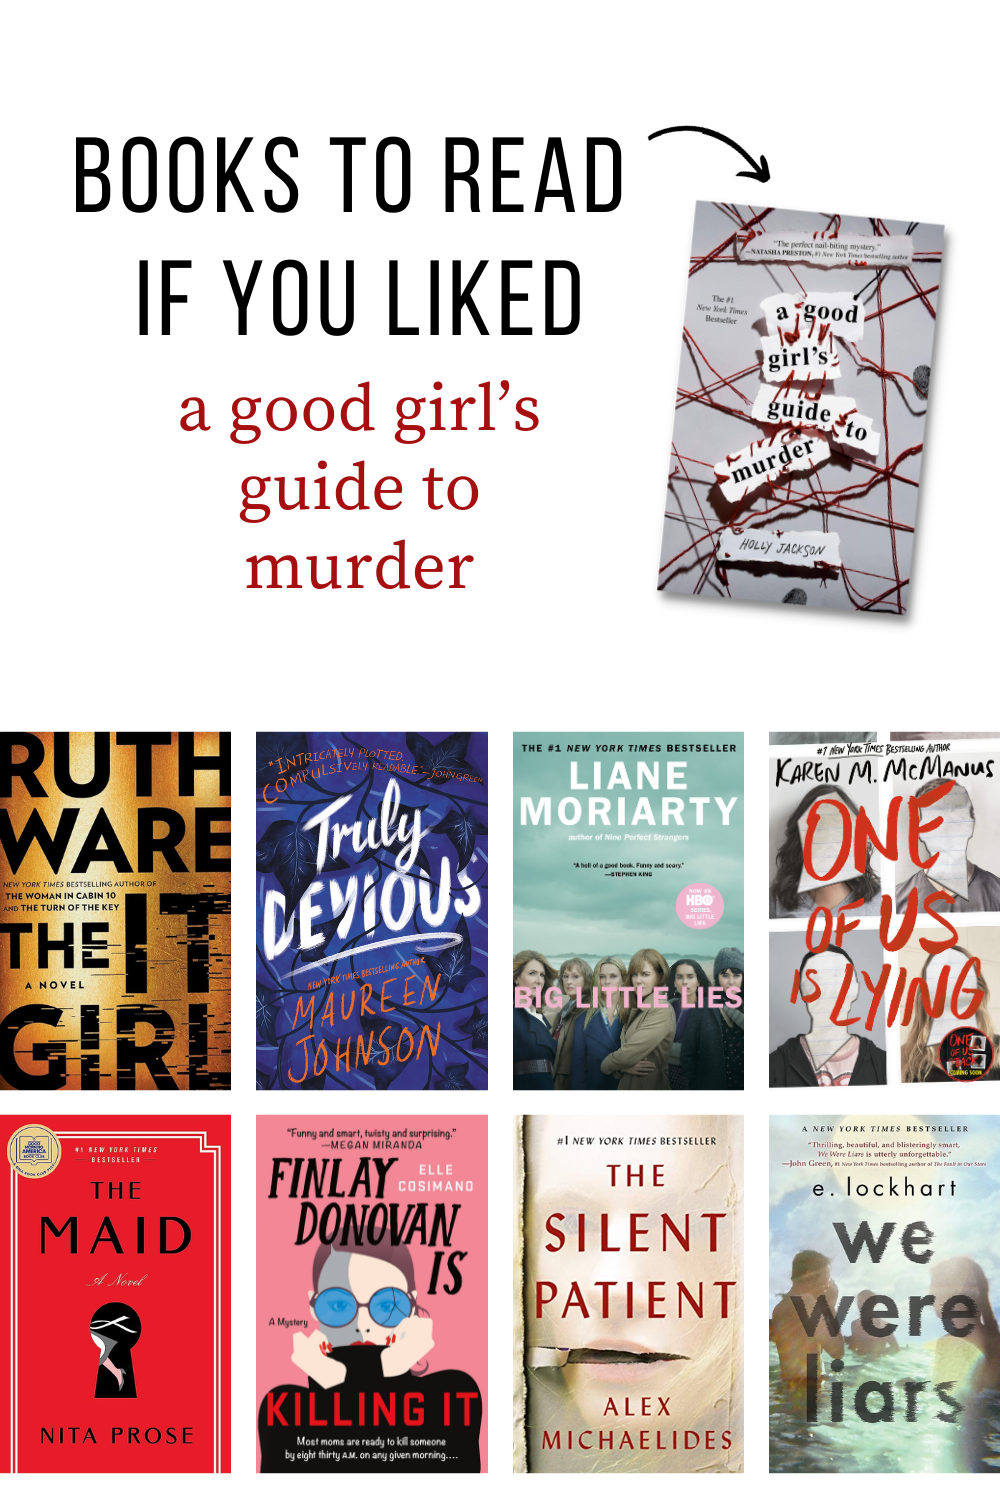 a good girl's guide to murder read alikes